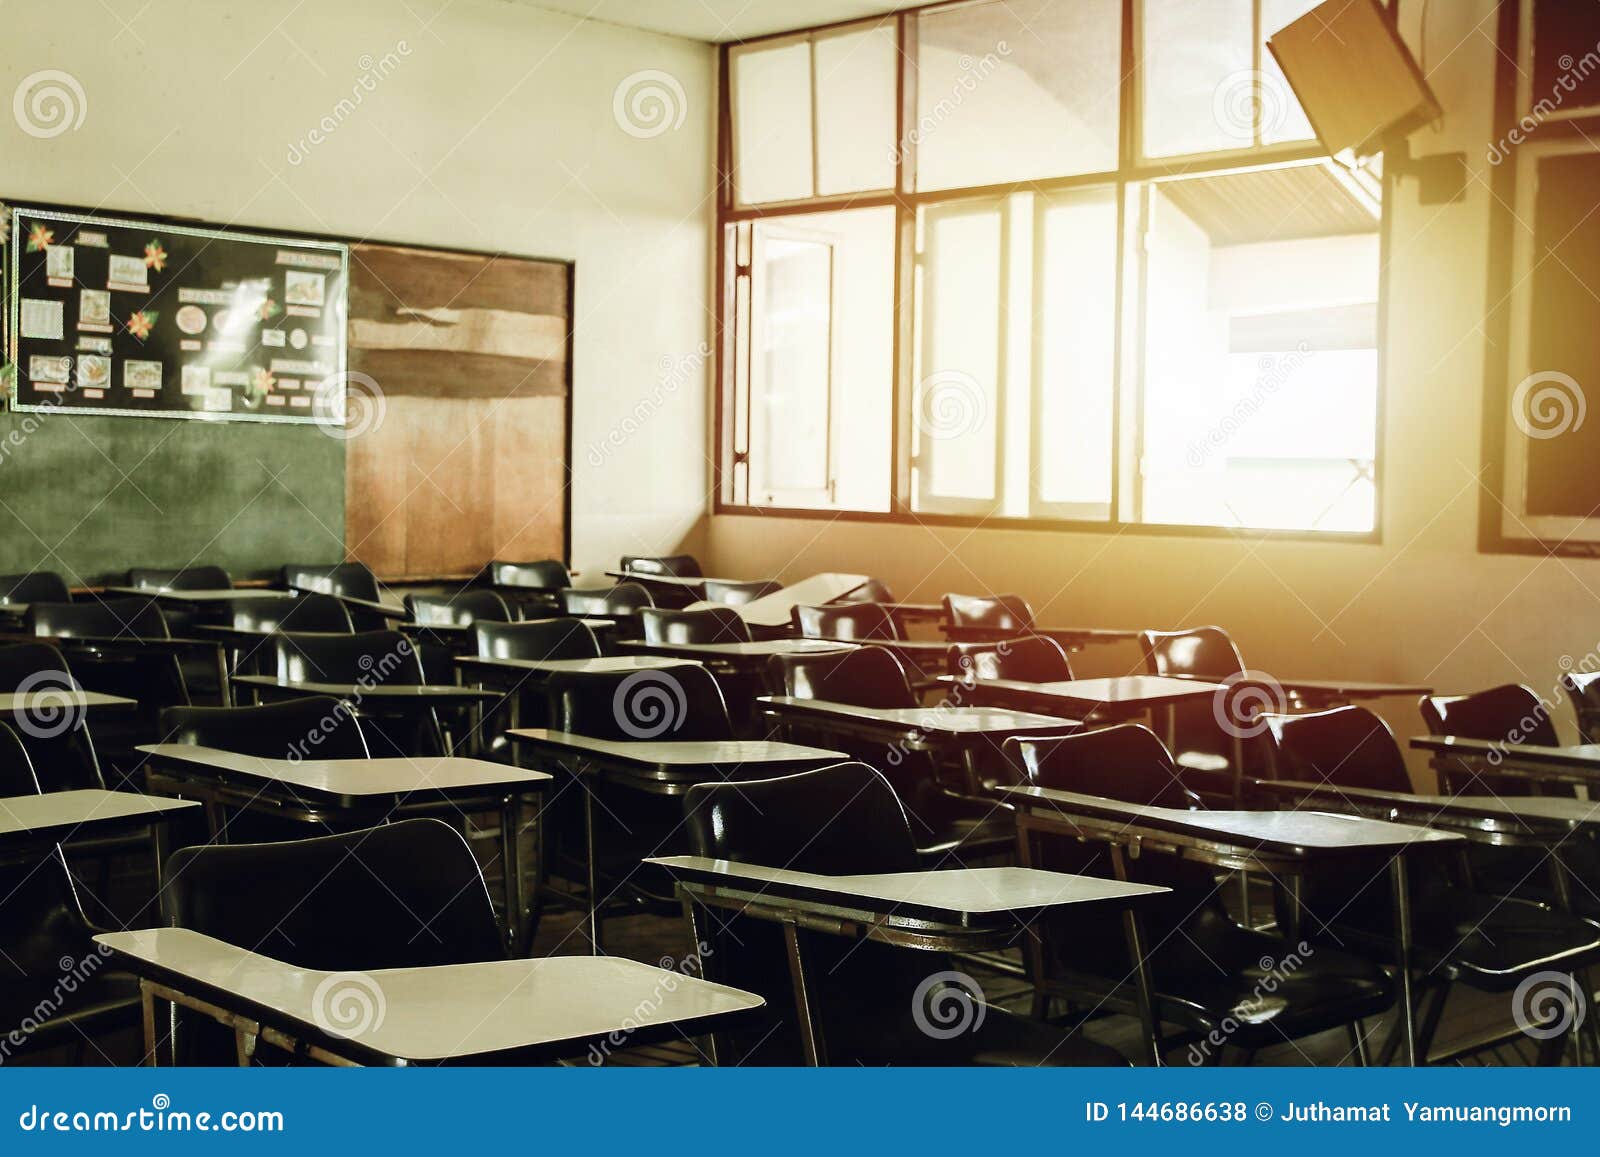 Classroom in Background without ,No Student or Teacher Stock Photo - Image  of space, people: 144686638